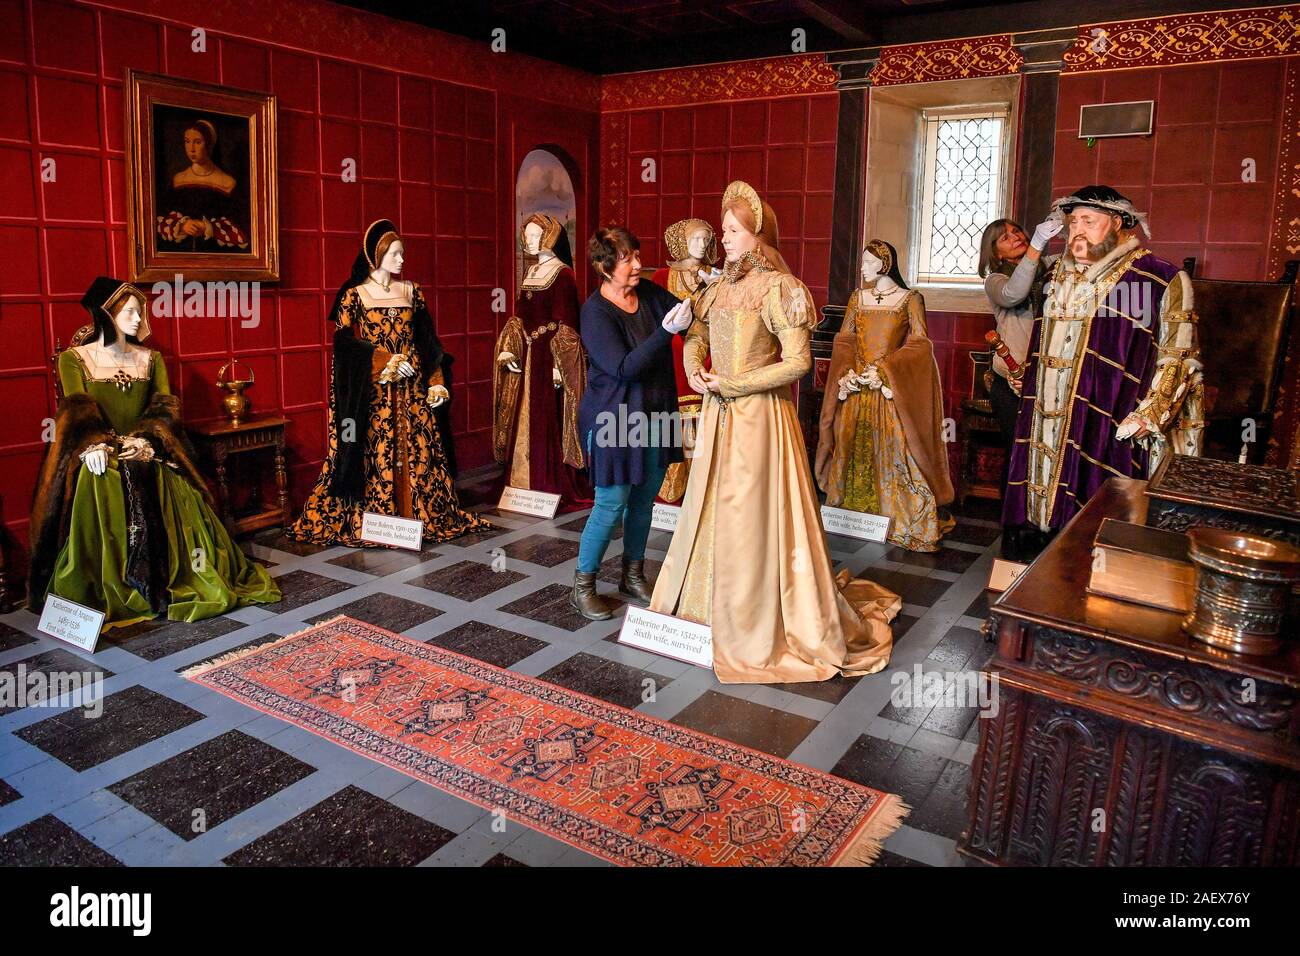 Life size mannequins of the six wives of King Henry VIII are gently brushed and cleaned as part of the cleaning and maintenance of exhibitions at Sudeley Castle in Winchcombe, Gloucestershire. Katherine Parr, the last and surviving wife of King Henry VIII, lived, died and is buried within the grounds of the castle. Stock Photo